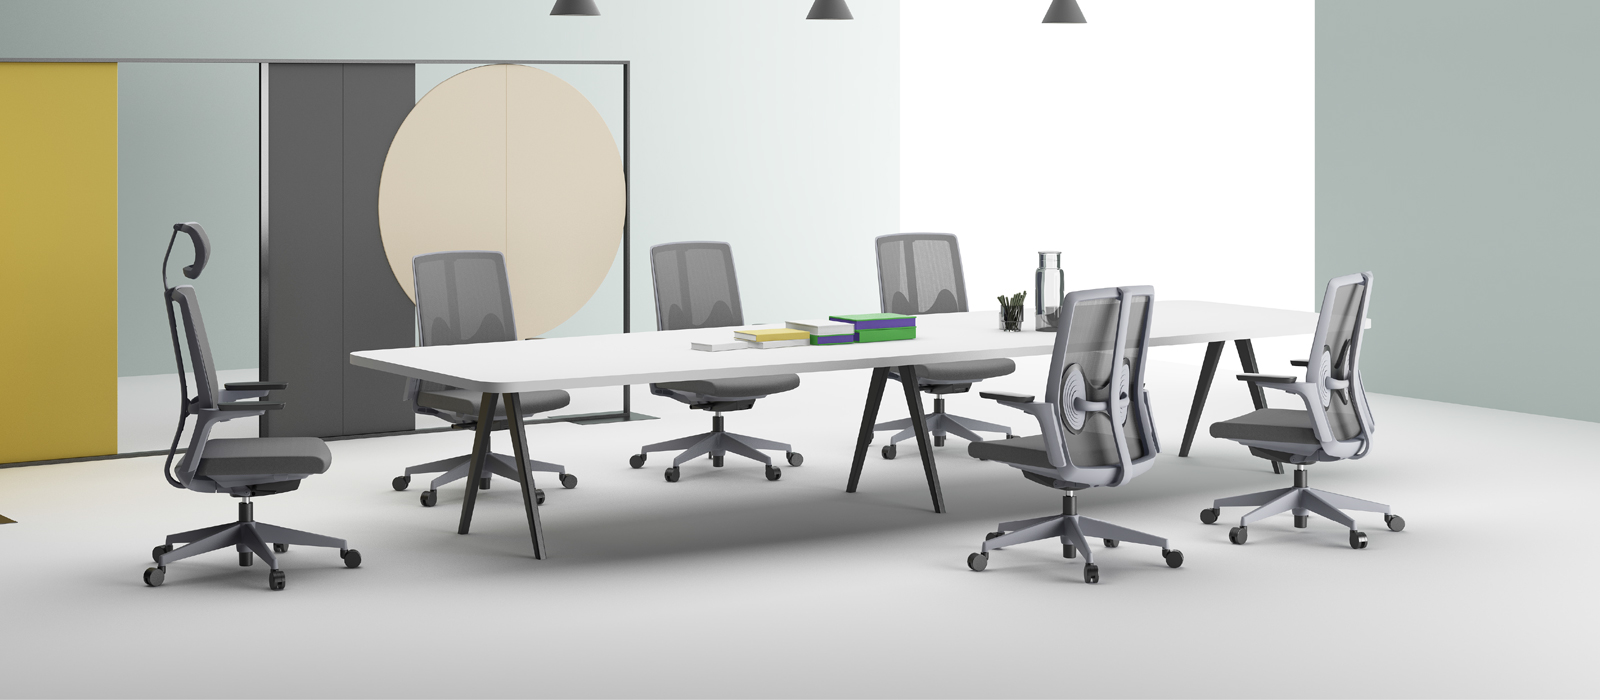 Workaholic™ Premium Butterfly mesh chair - Meeting room